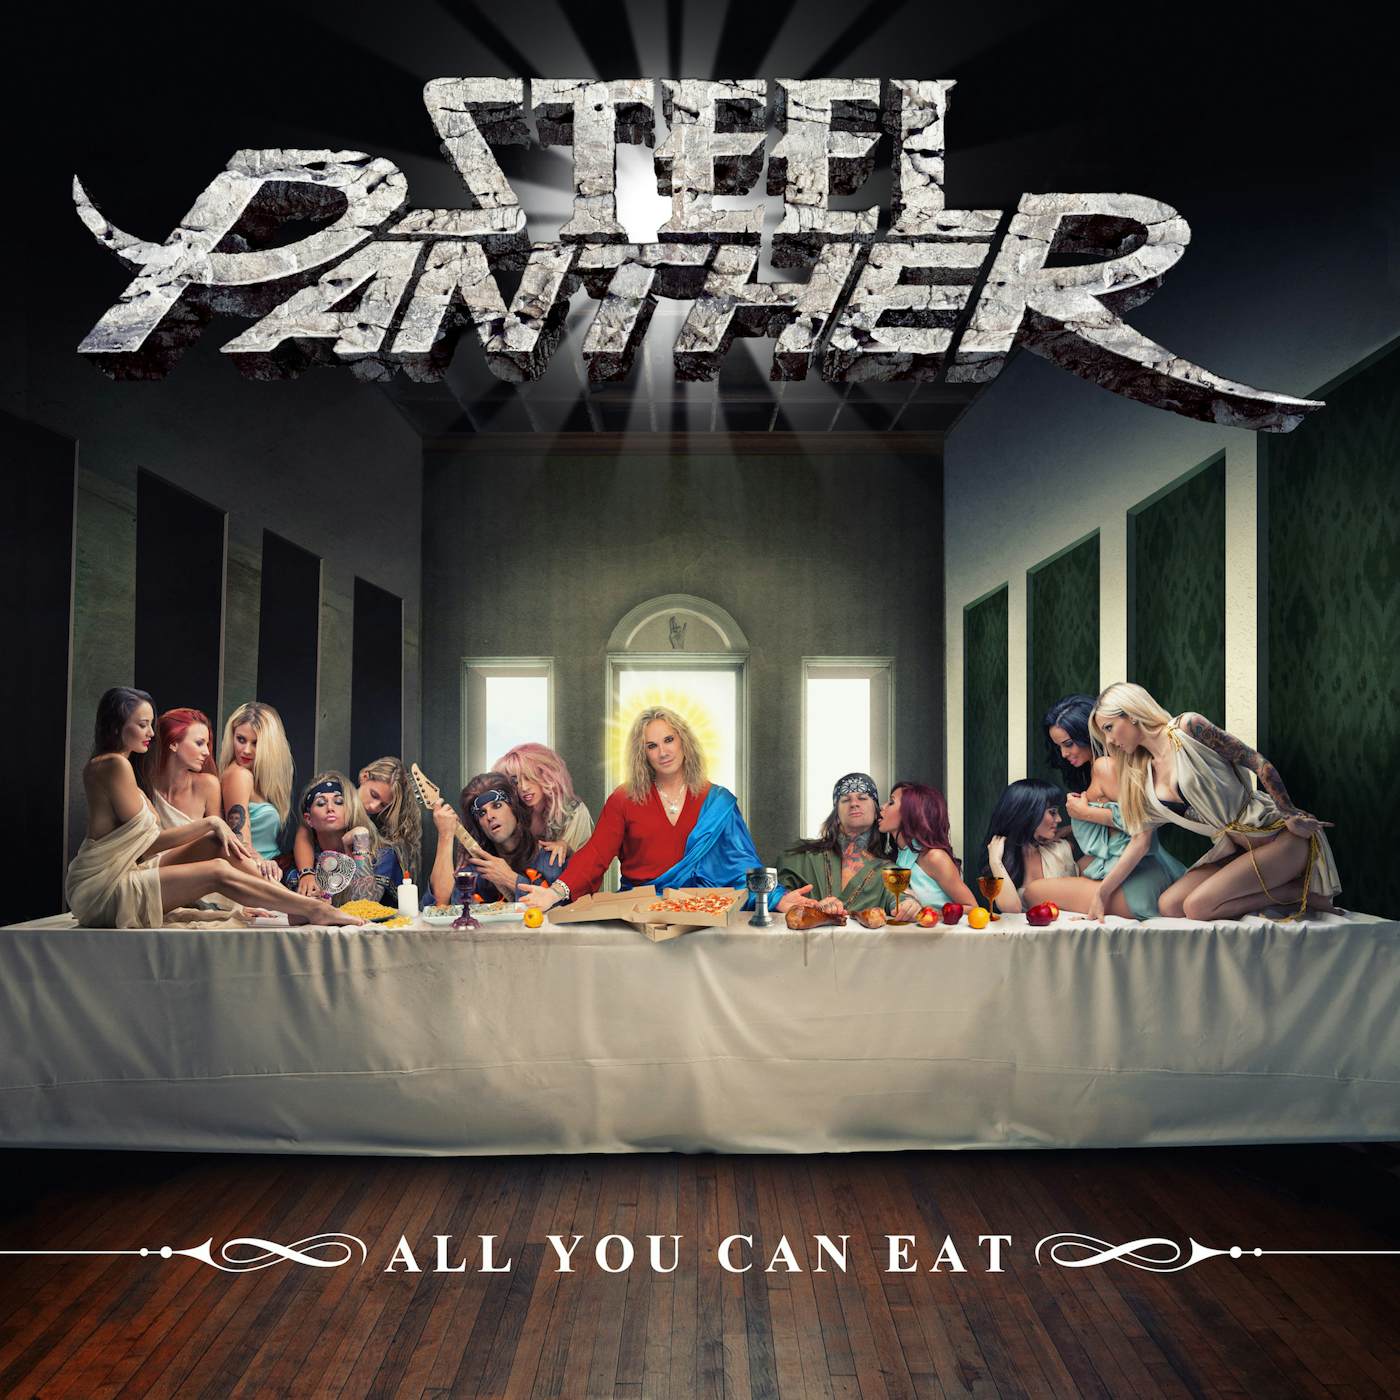 Steel Panther ALL YOU CAN EAT CD